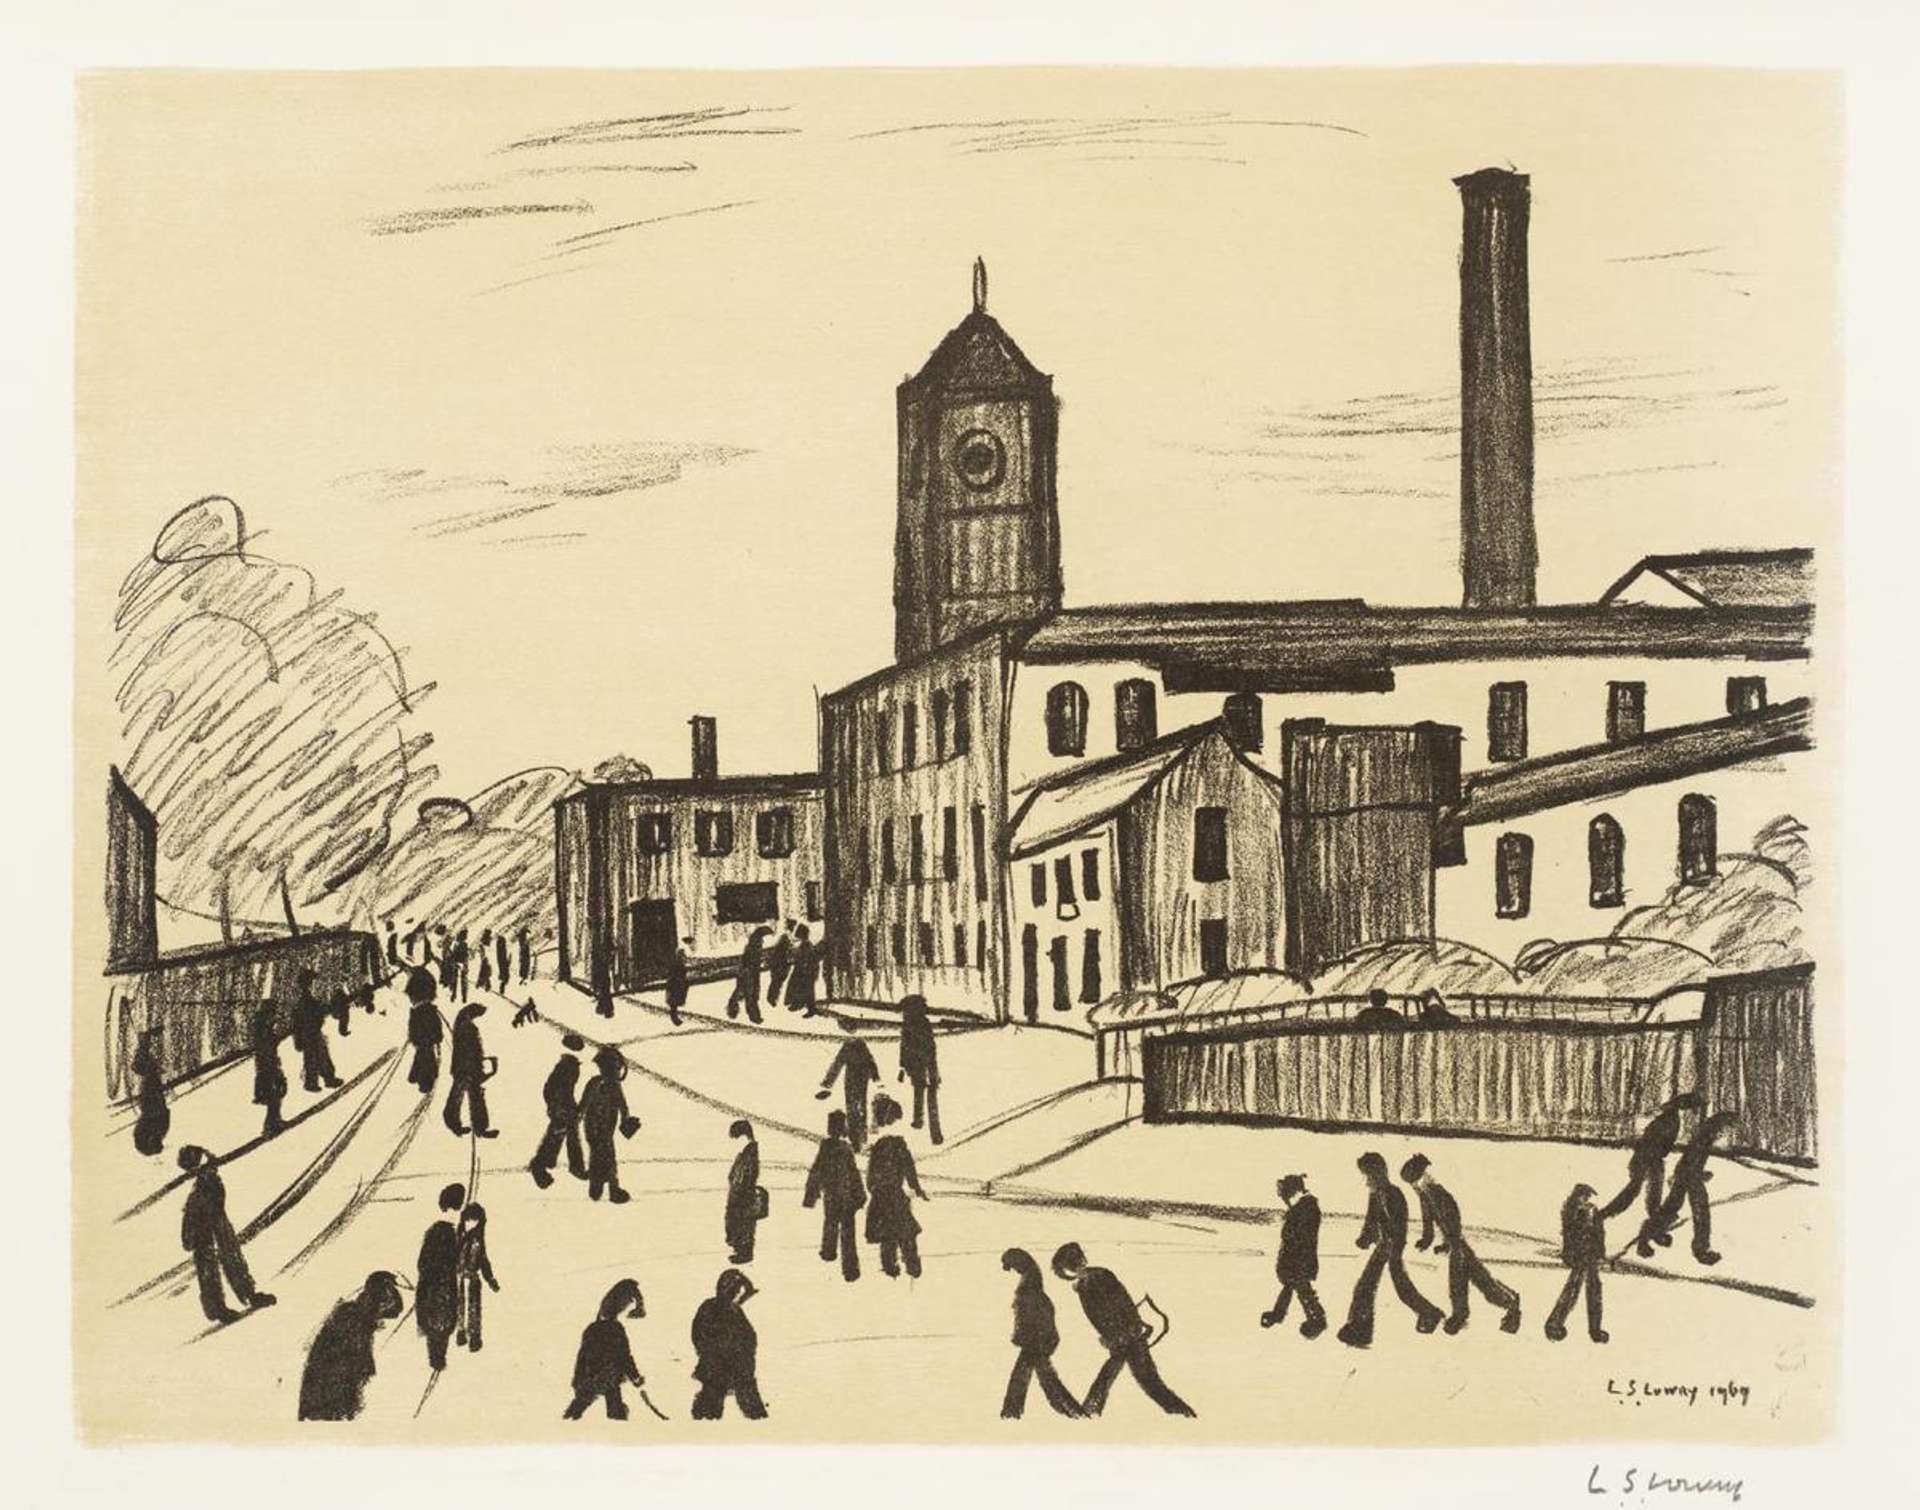 A Northern Town shows a view looking down the street of a small town with many stylised figures dotted throughout the centre of the composition. This is a lithograph of a drawing by Lowry, rendered in black line against the cream paper.